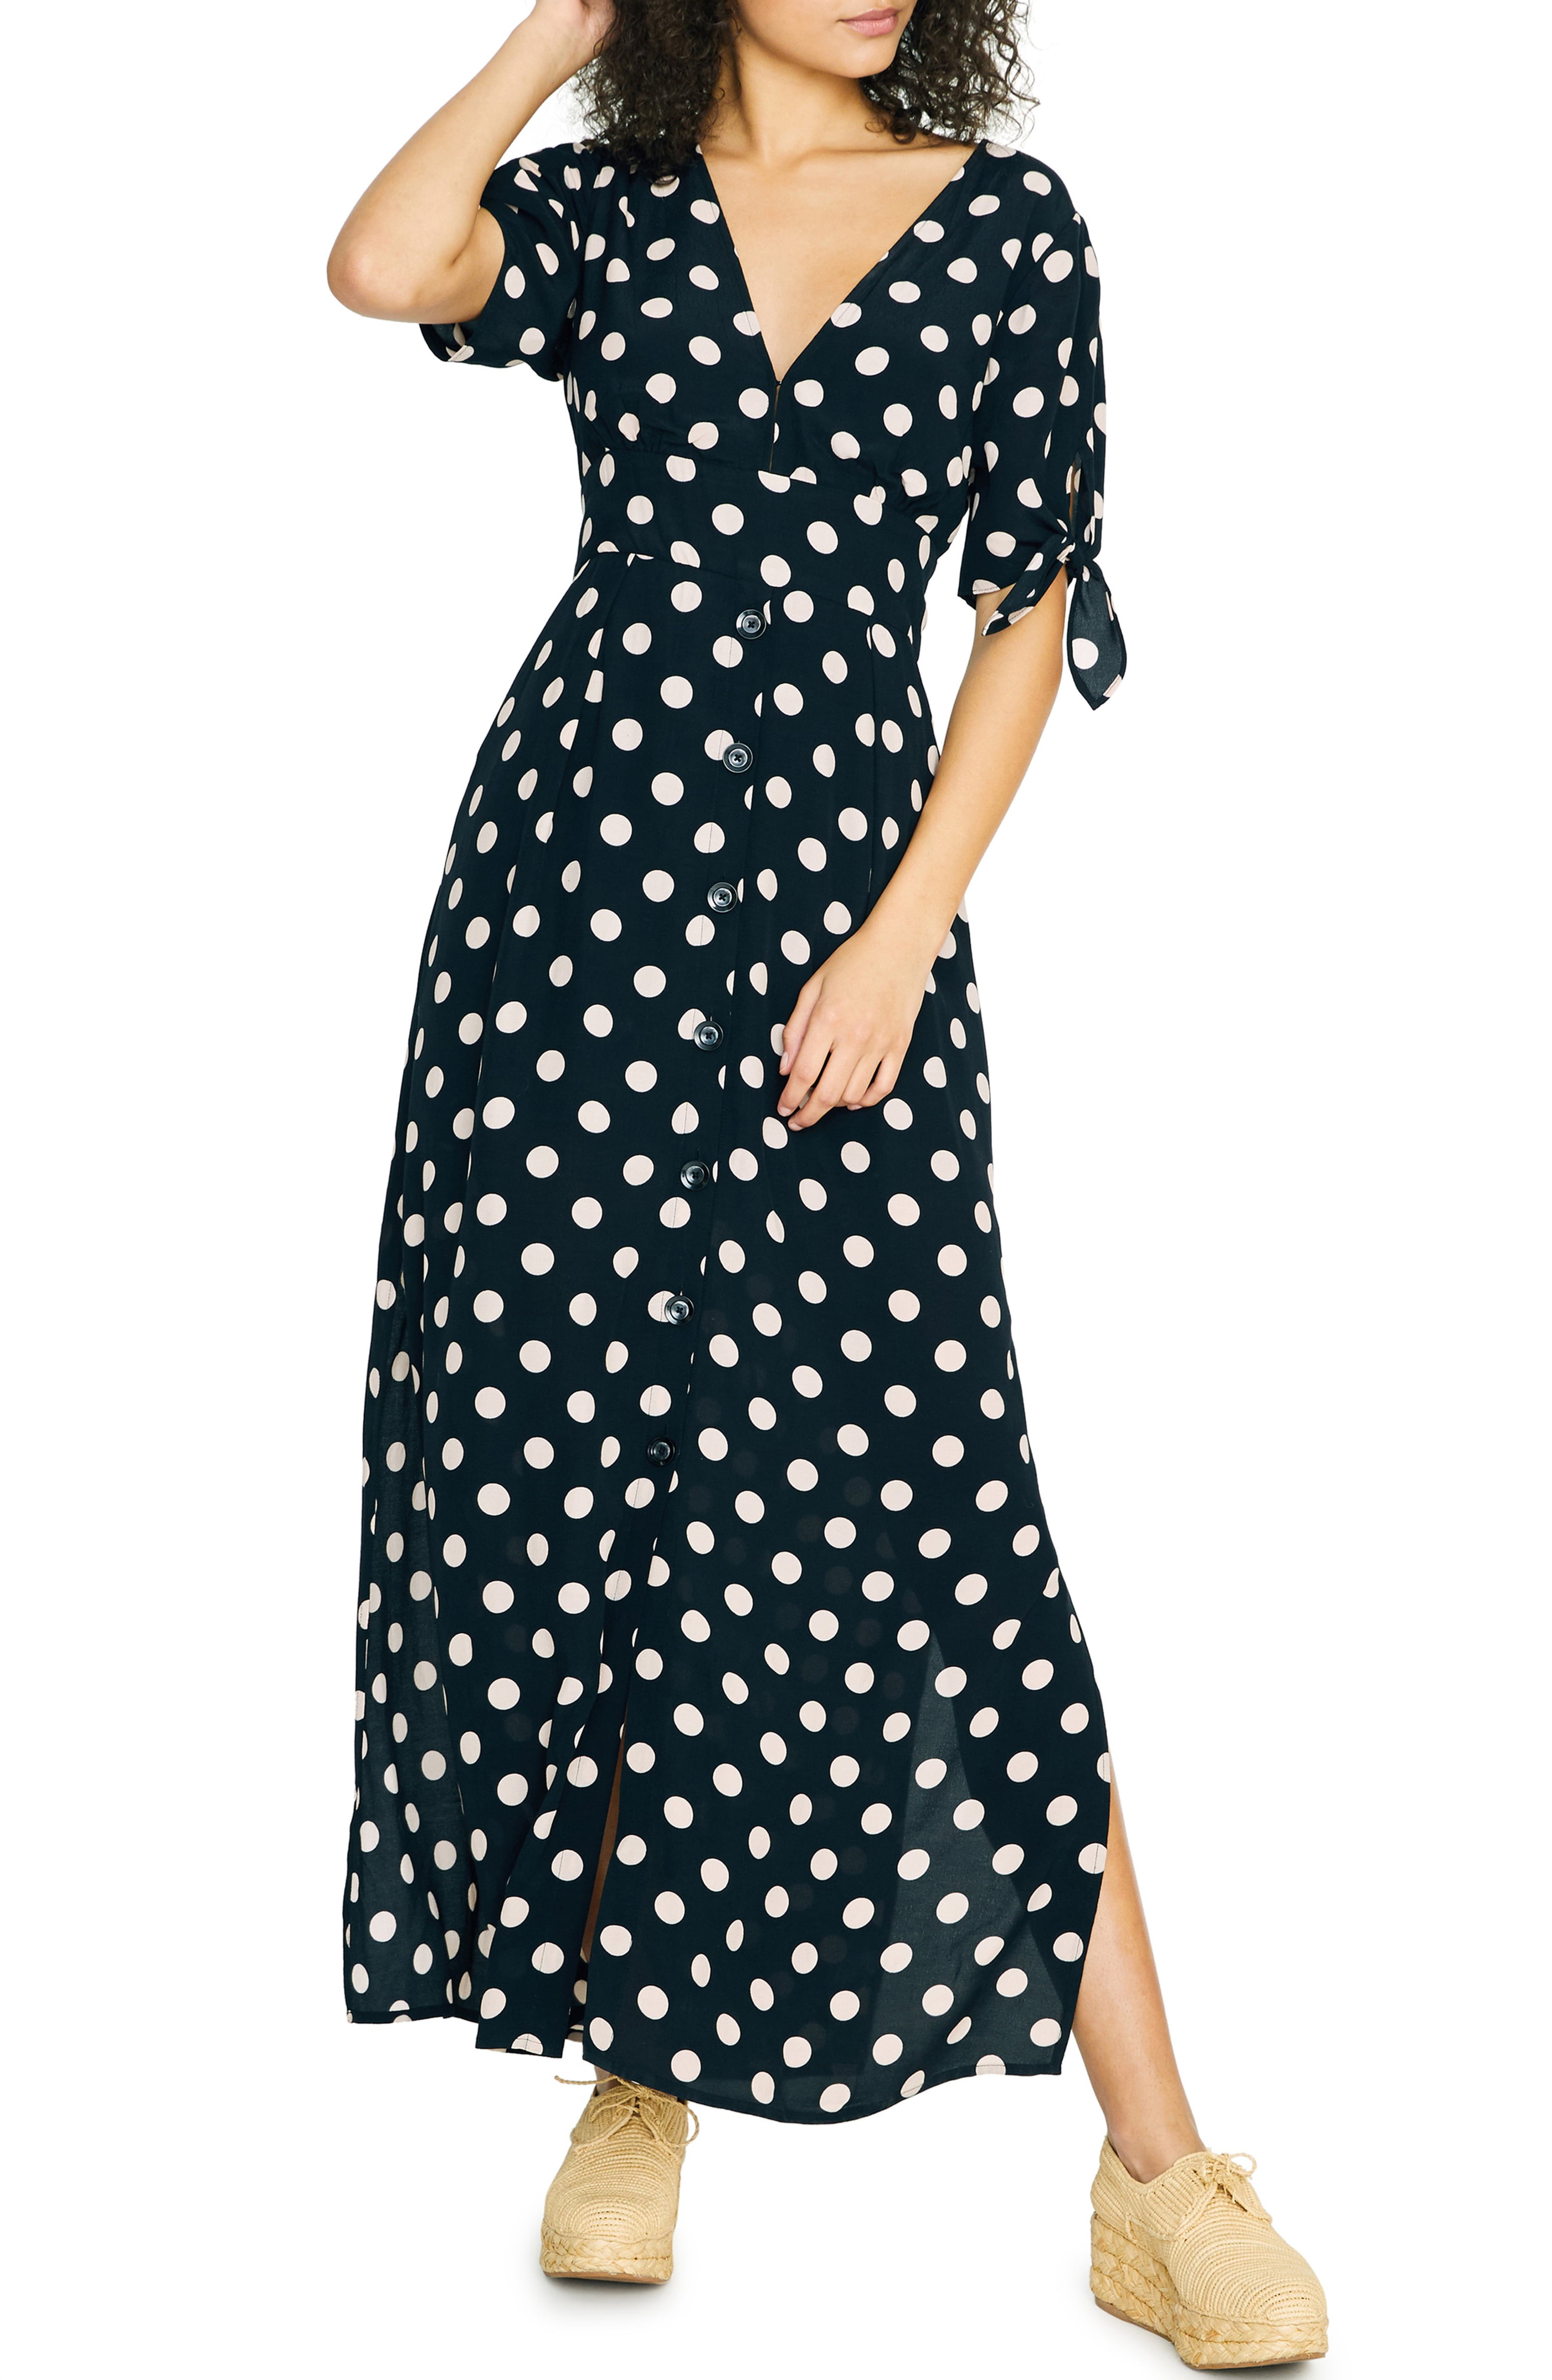 can you wear black and white polka dots to a wedding